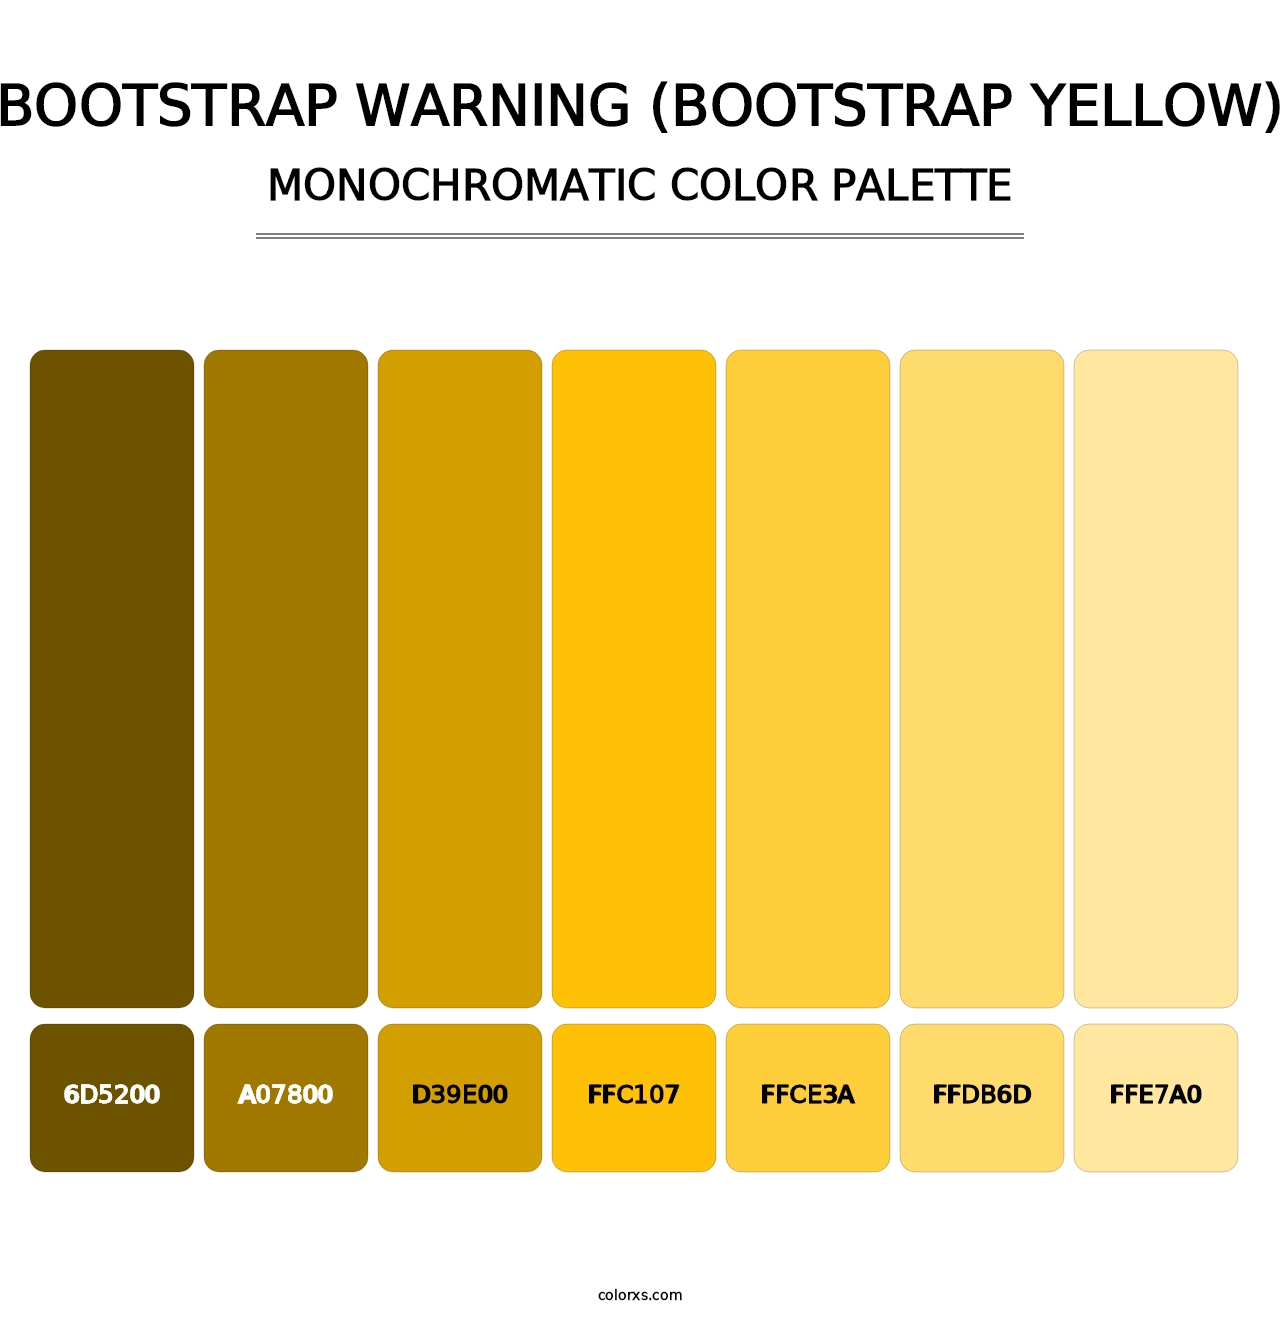 Bootstrap Warning (Bootstrap Yellow) - Monochromatic Color Palette